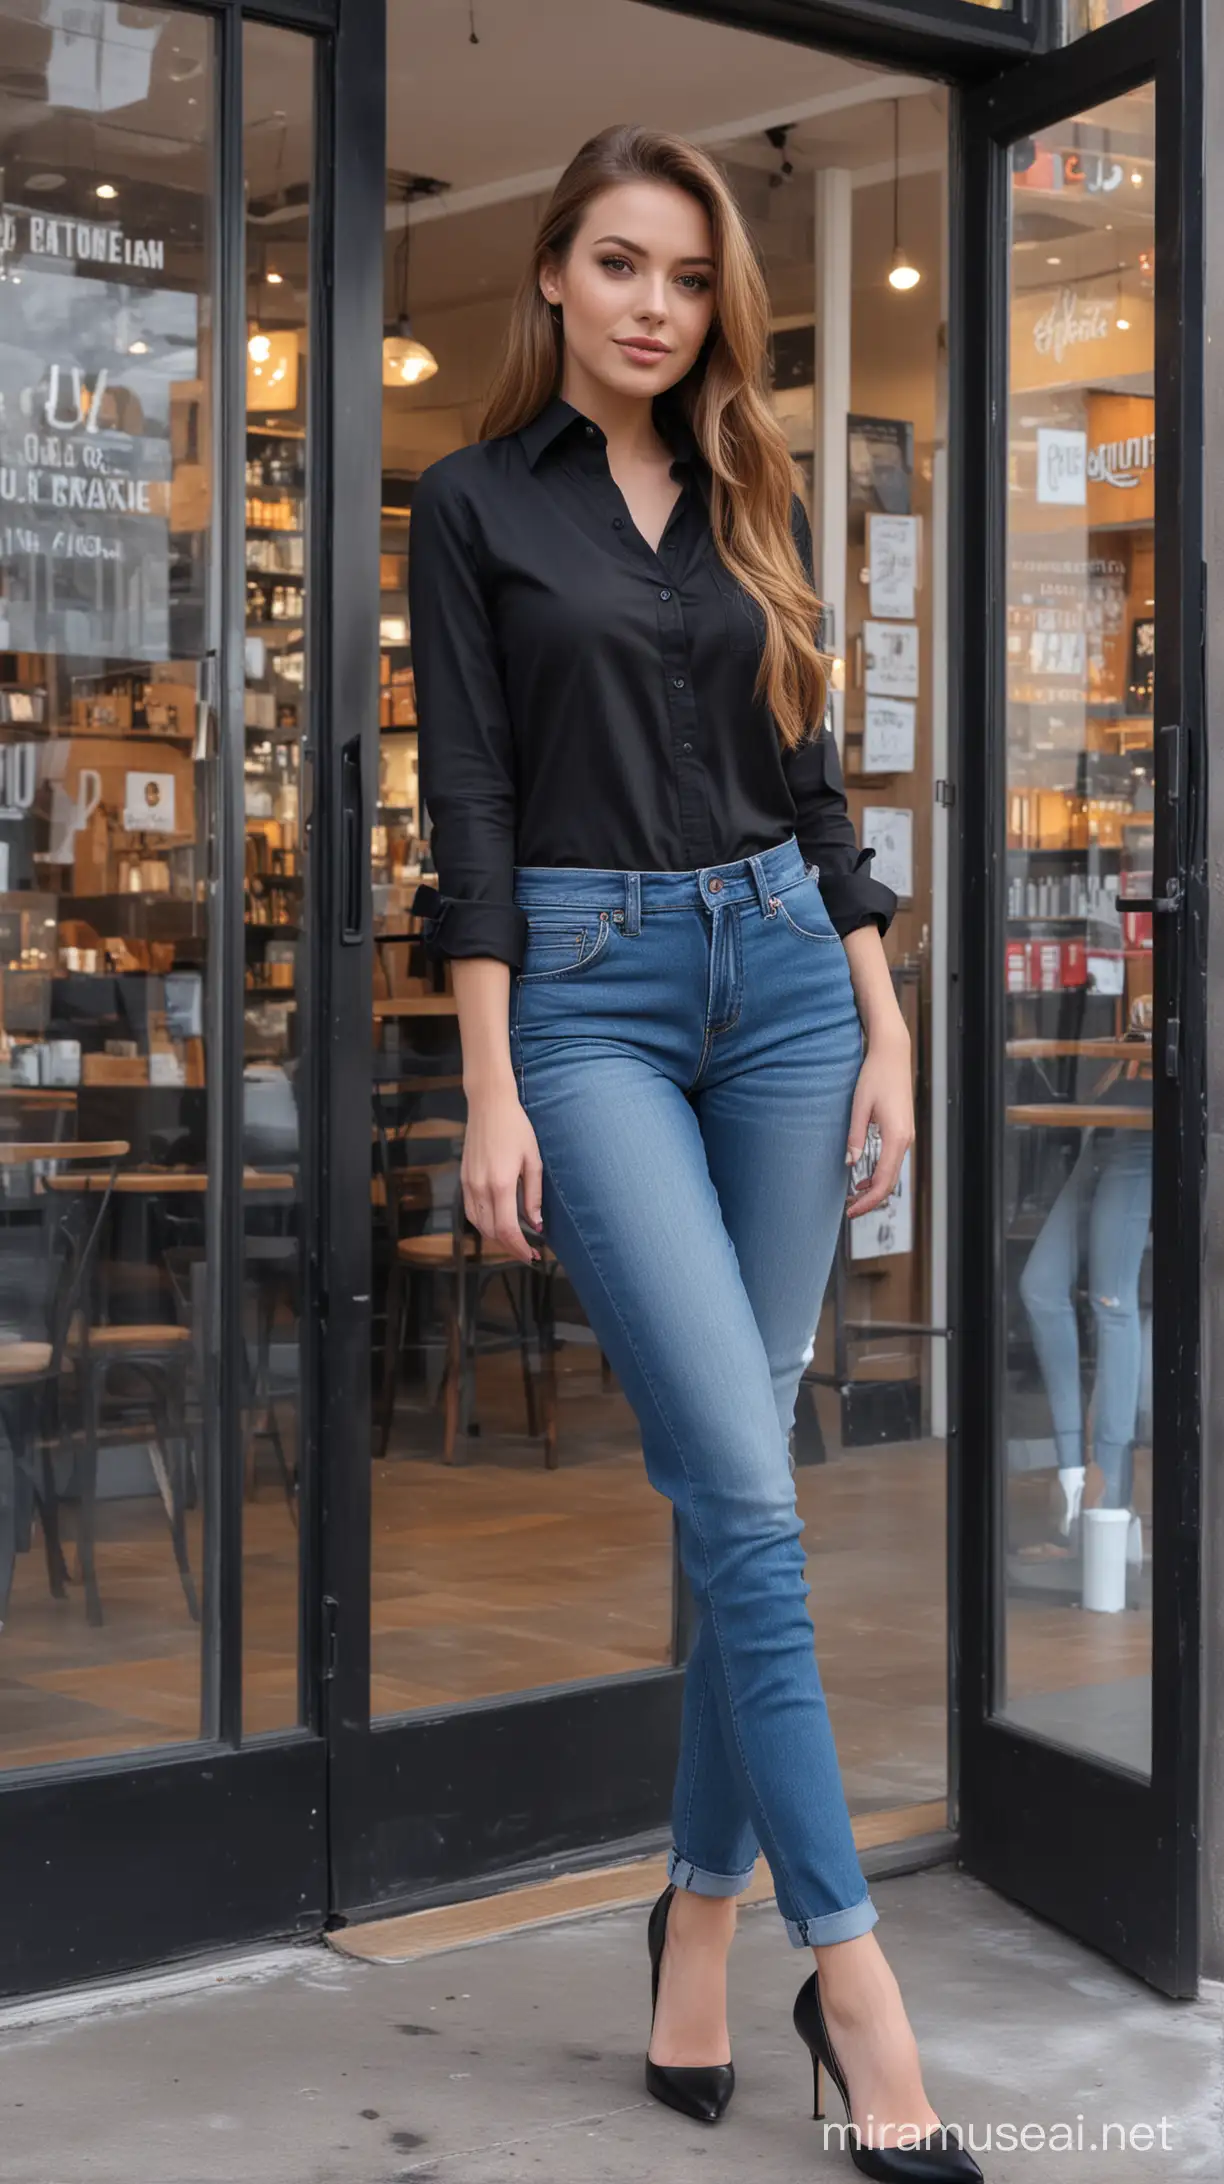 4k Ai art front view beautiful USA girl ear tops high heels multiple colour jeans and black full sleeve button shirt in USA coffee shop door